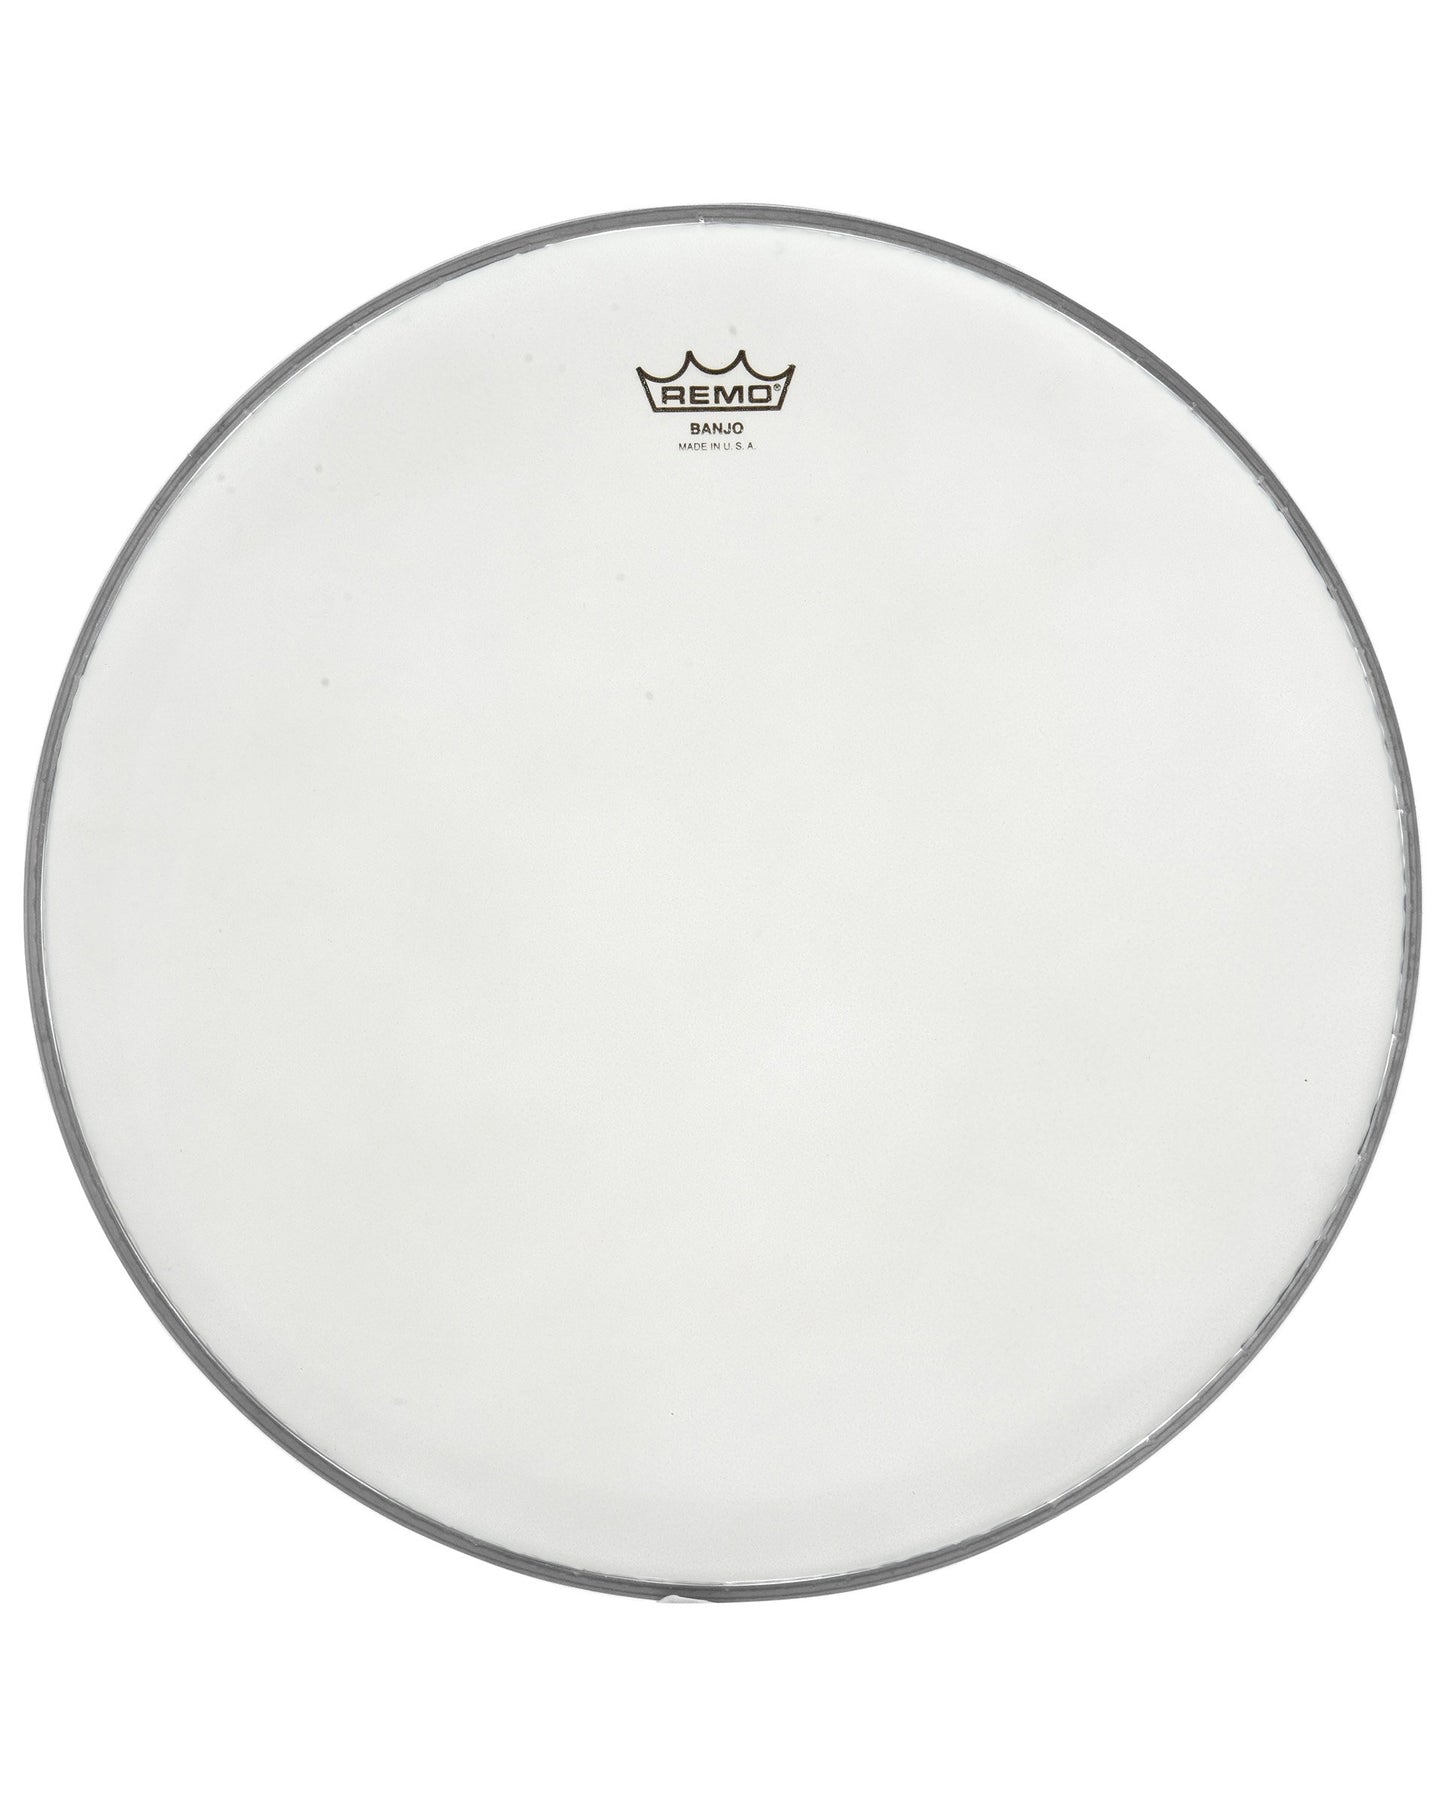 Image 1 of Remo Frosted Bottom Banjo Head, 10 5/8 Inch Diameter, Medium Crown (7/16 Inch) - - SKU# B1010-M-FRB : Product Type Accessories & Parts : Elderly Instruments